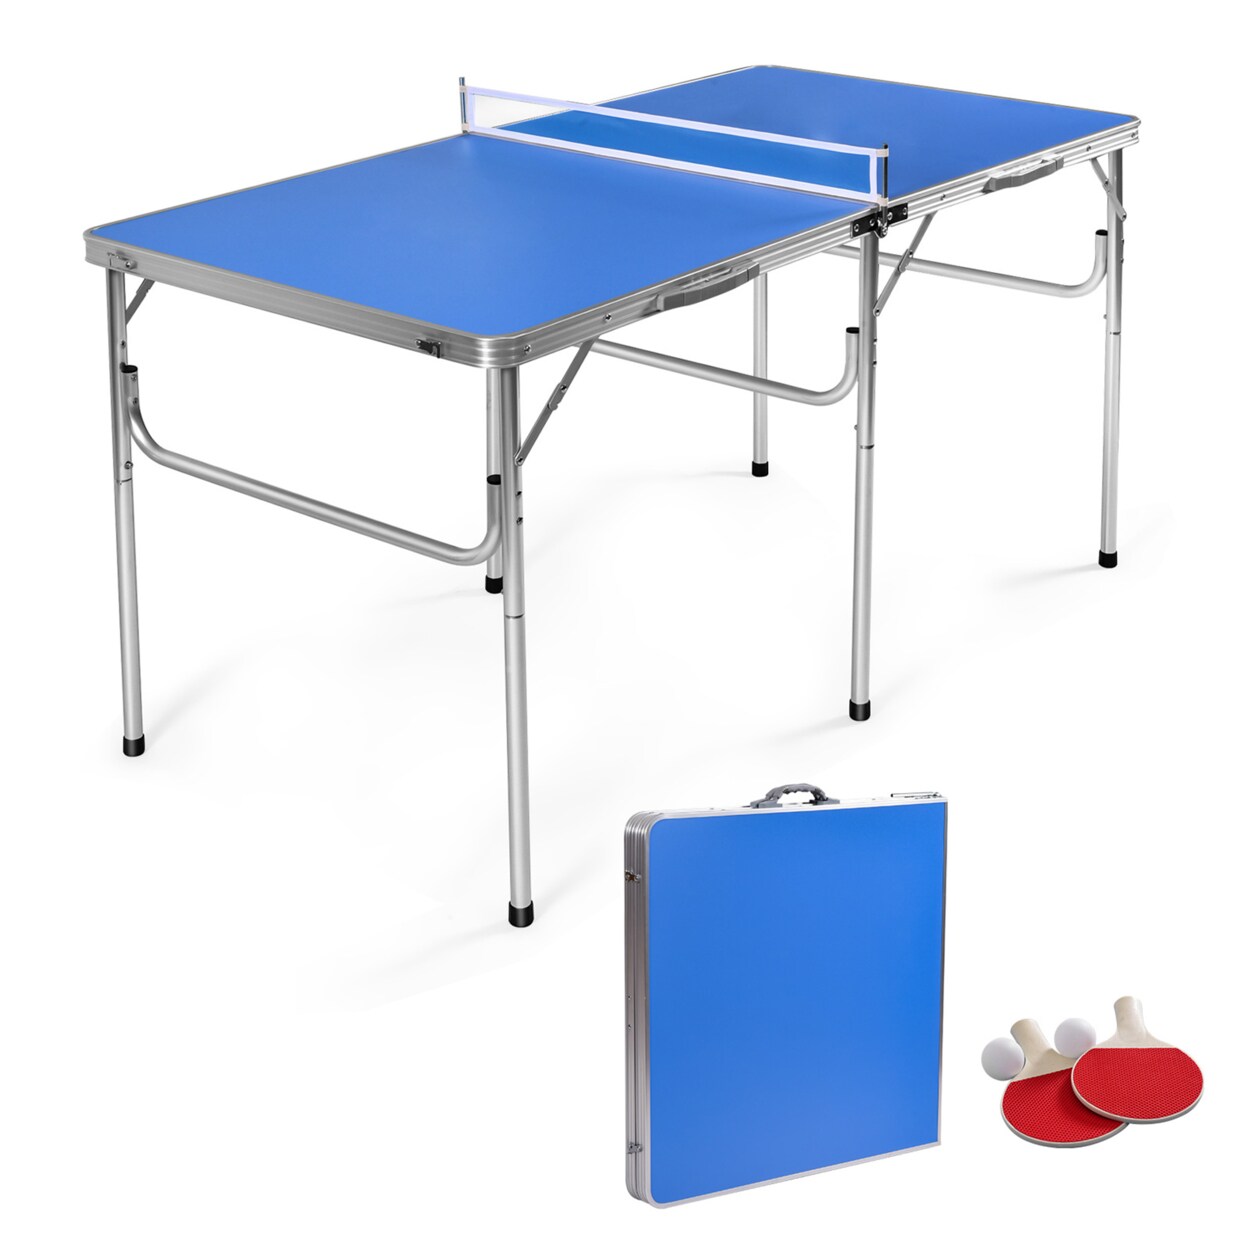 Gymax Folding Table Tennis Table Portable Ping Pong Table w/ 2 Paddles and 2 Balls